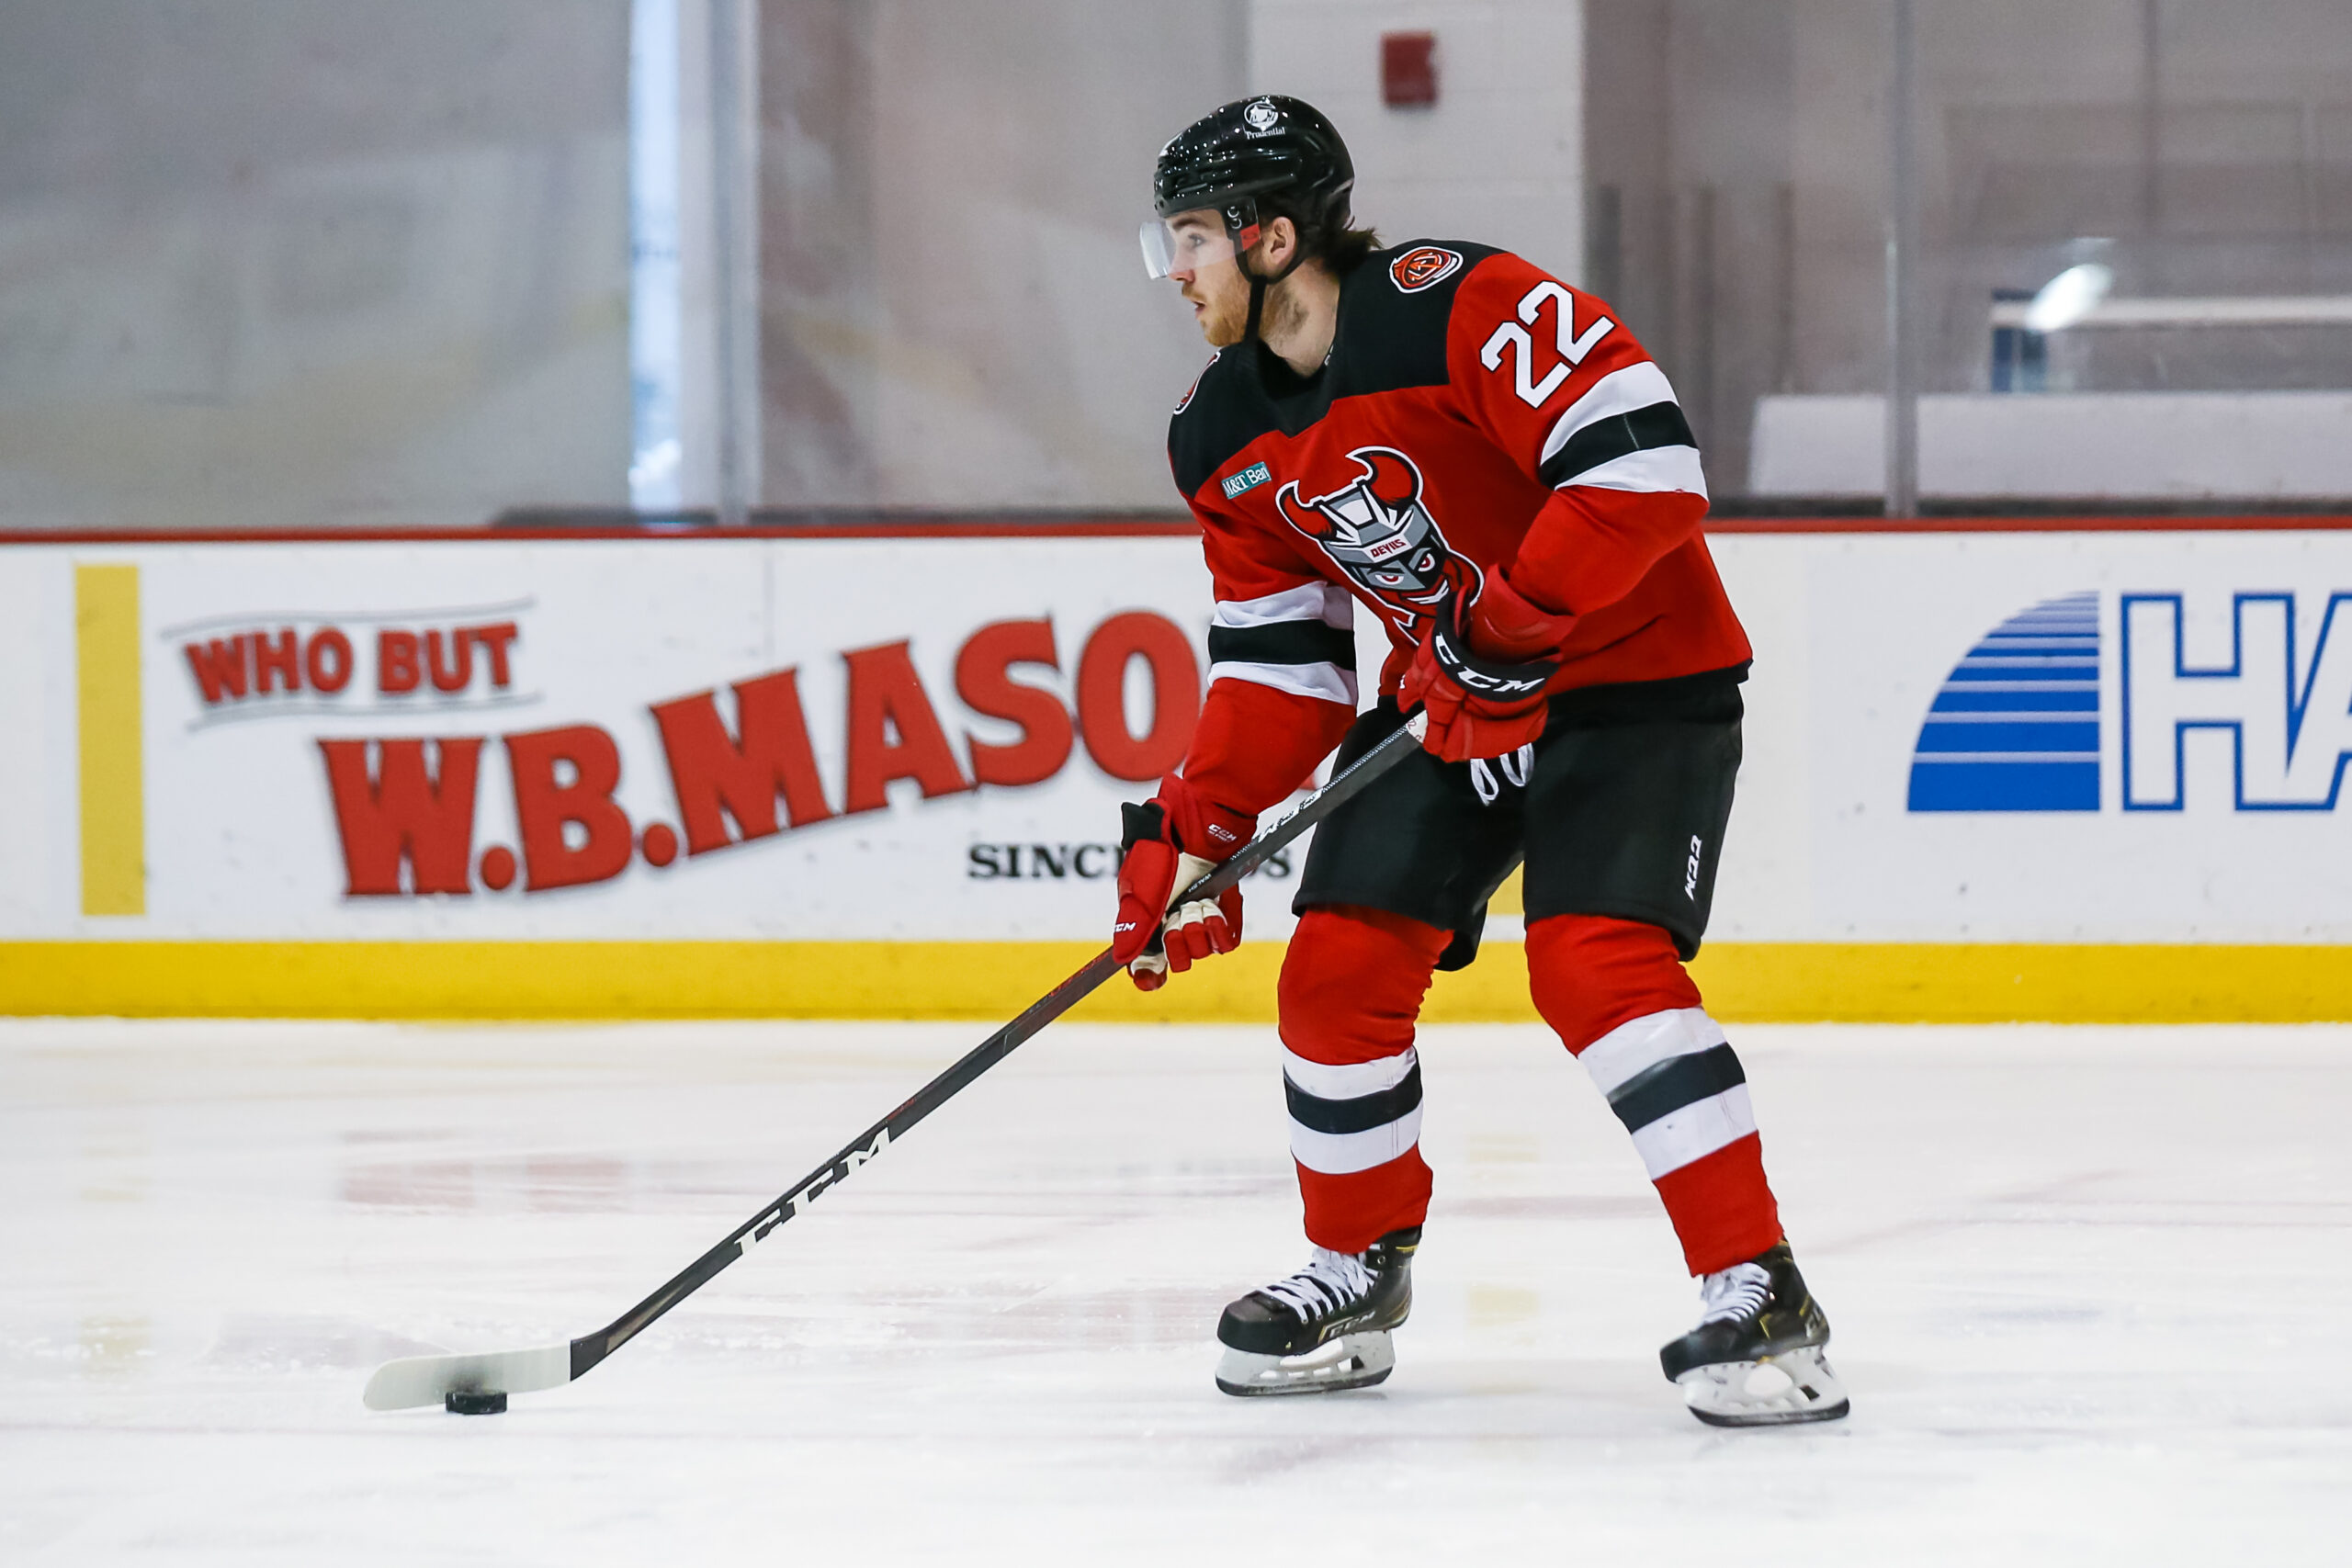 Devils' O'Neill, former AHL MVP, signs with KHL Jokerit - NBC Sports